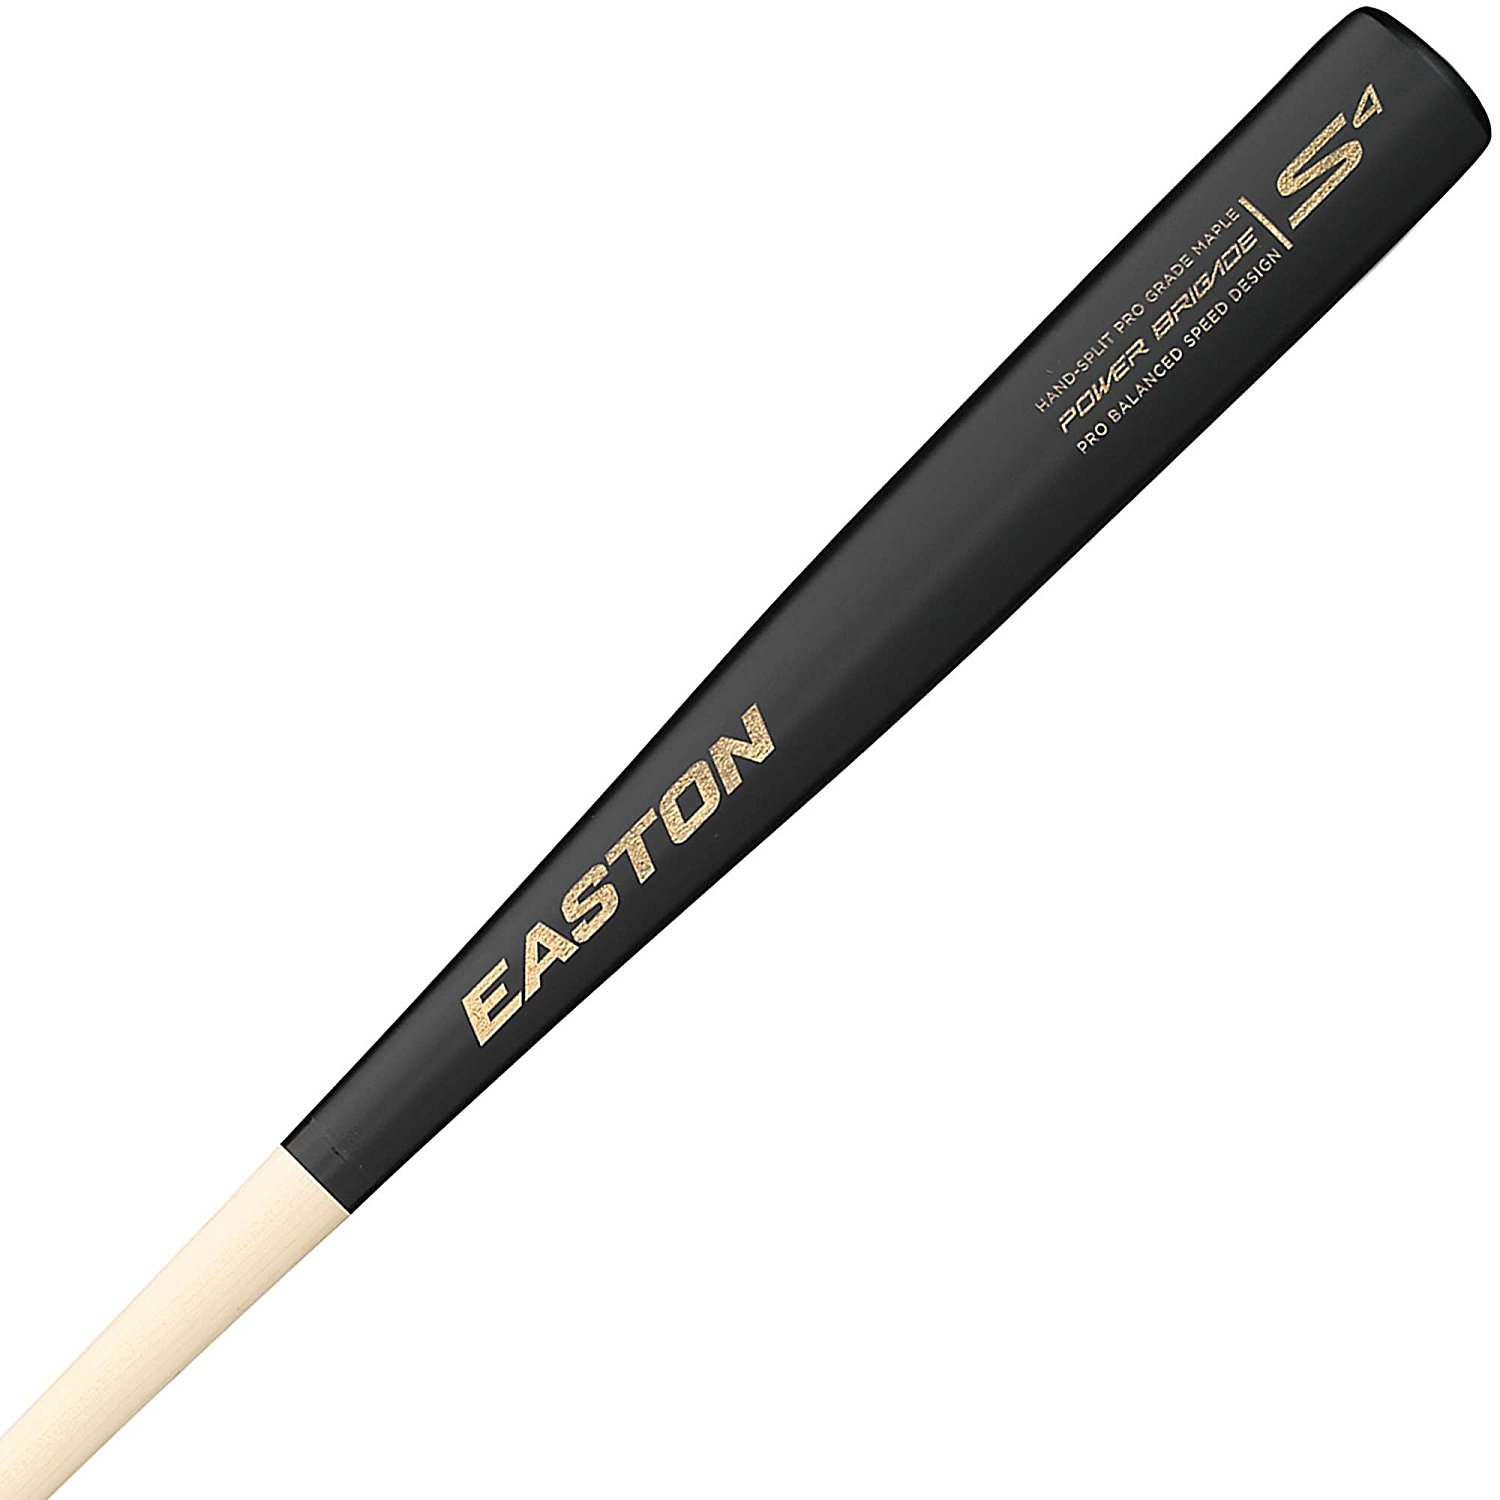 Best BBCOR Wood Bats 2016 - Top 4 Recommended